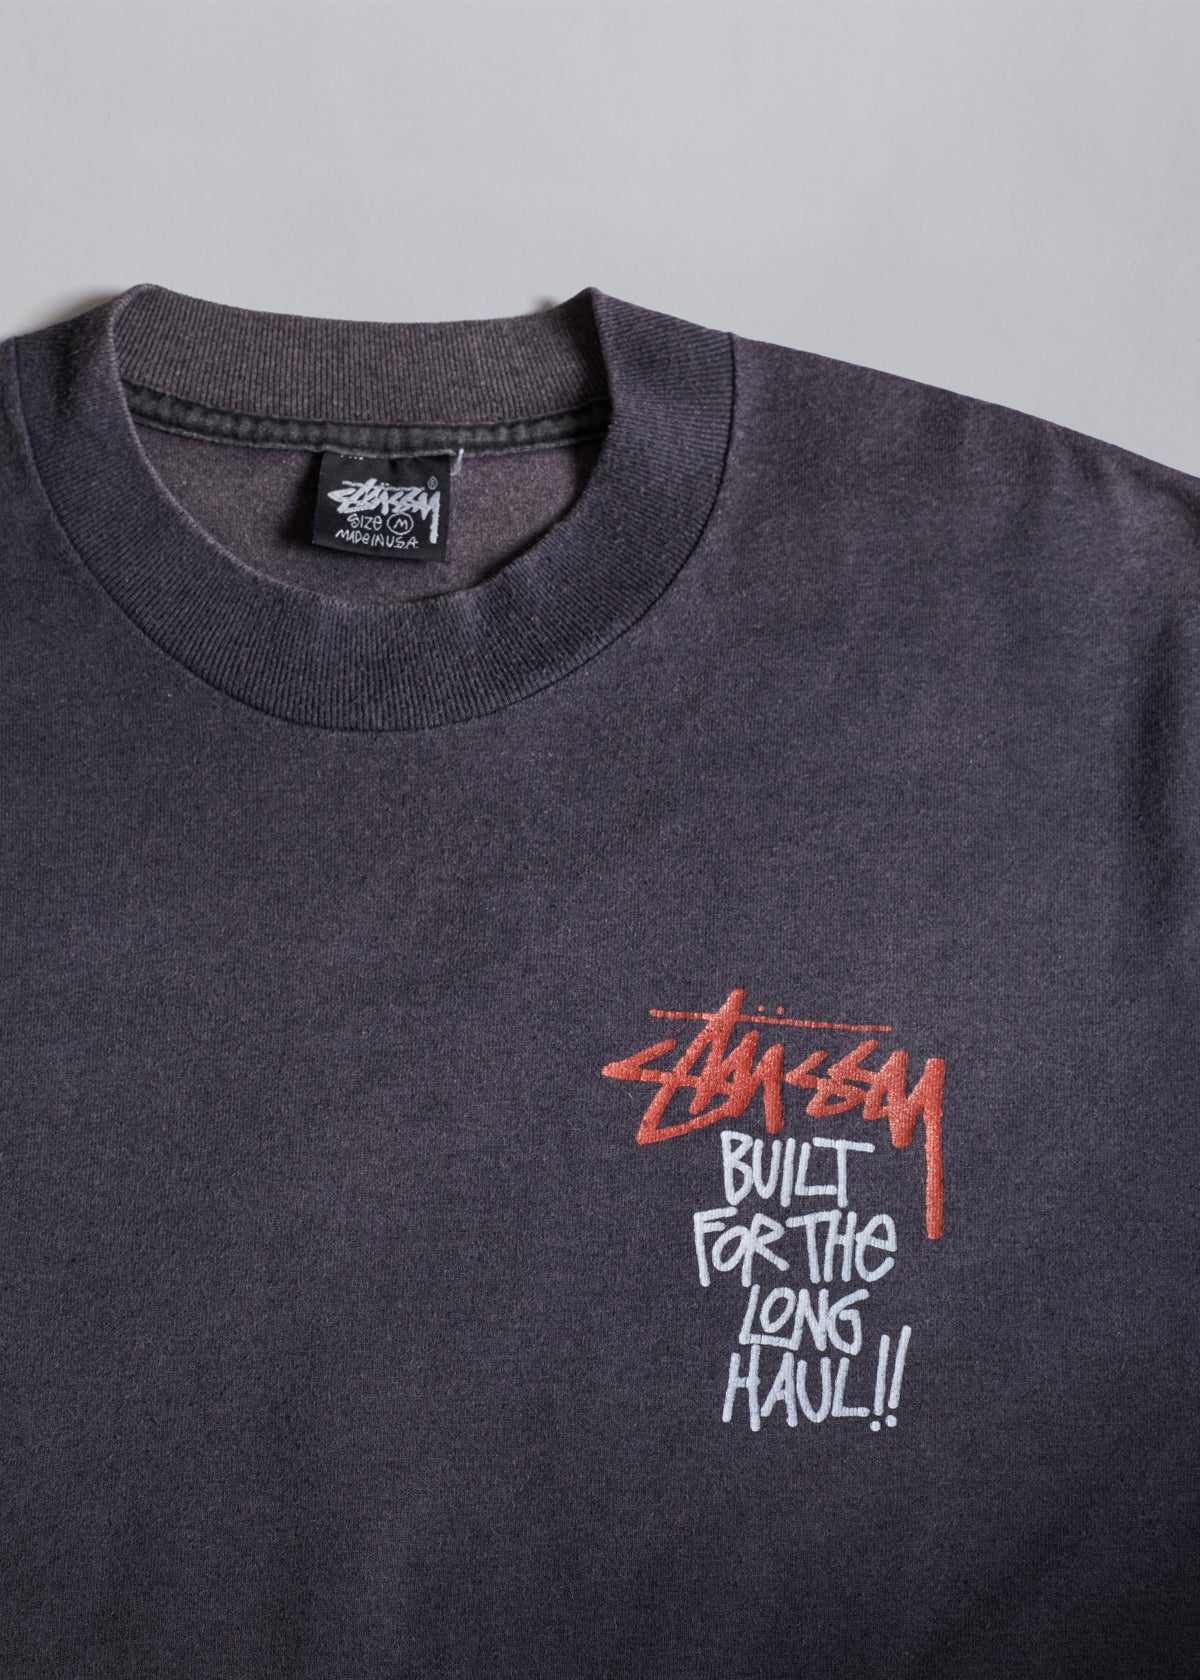 Built For The Long Haul Tee 1990's - Medium - The Archivist Store